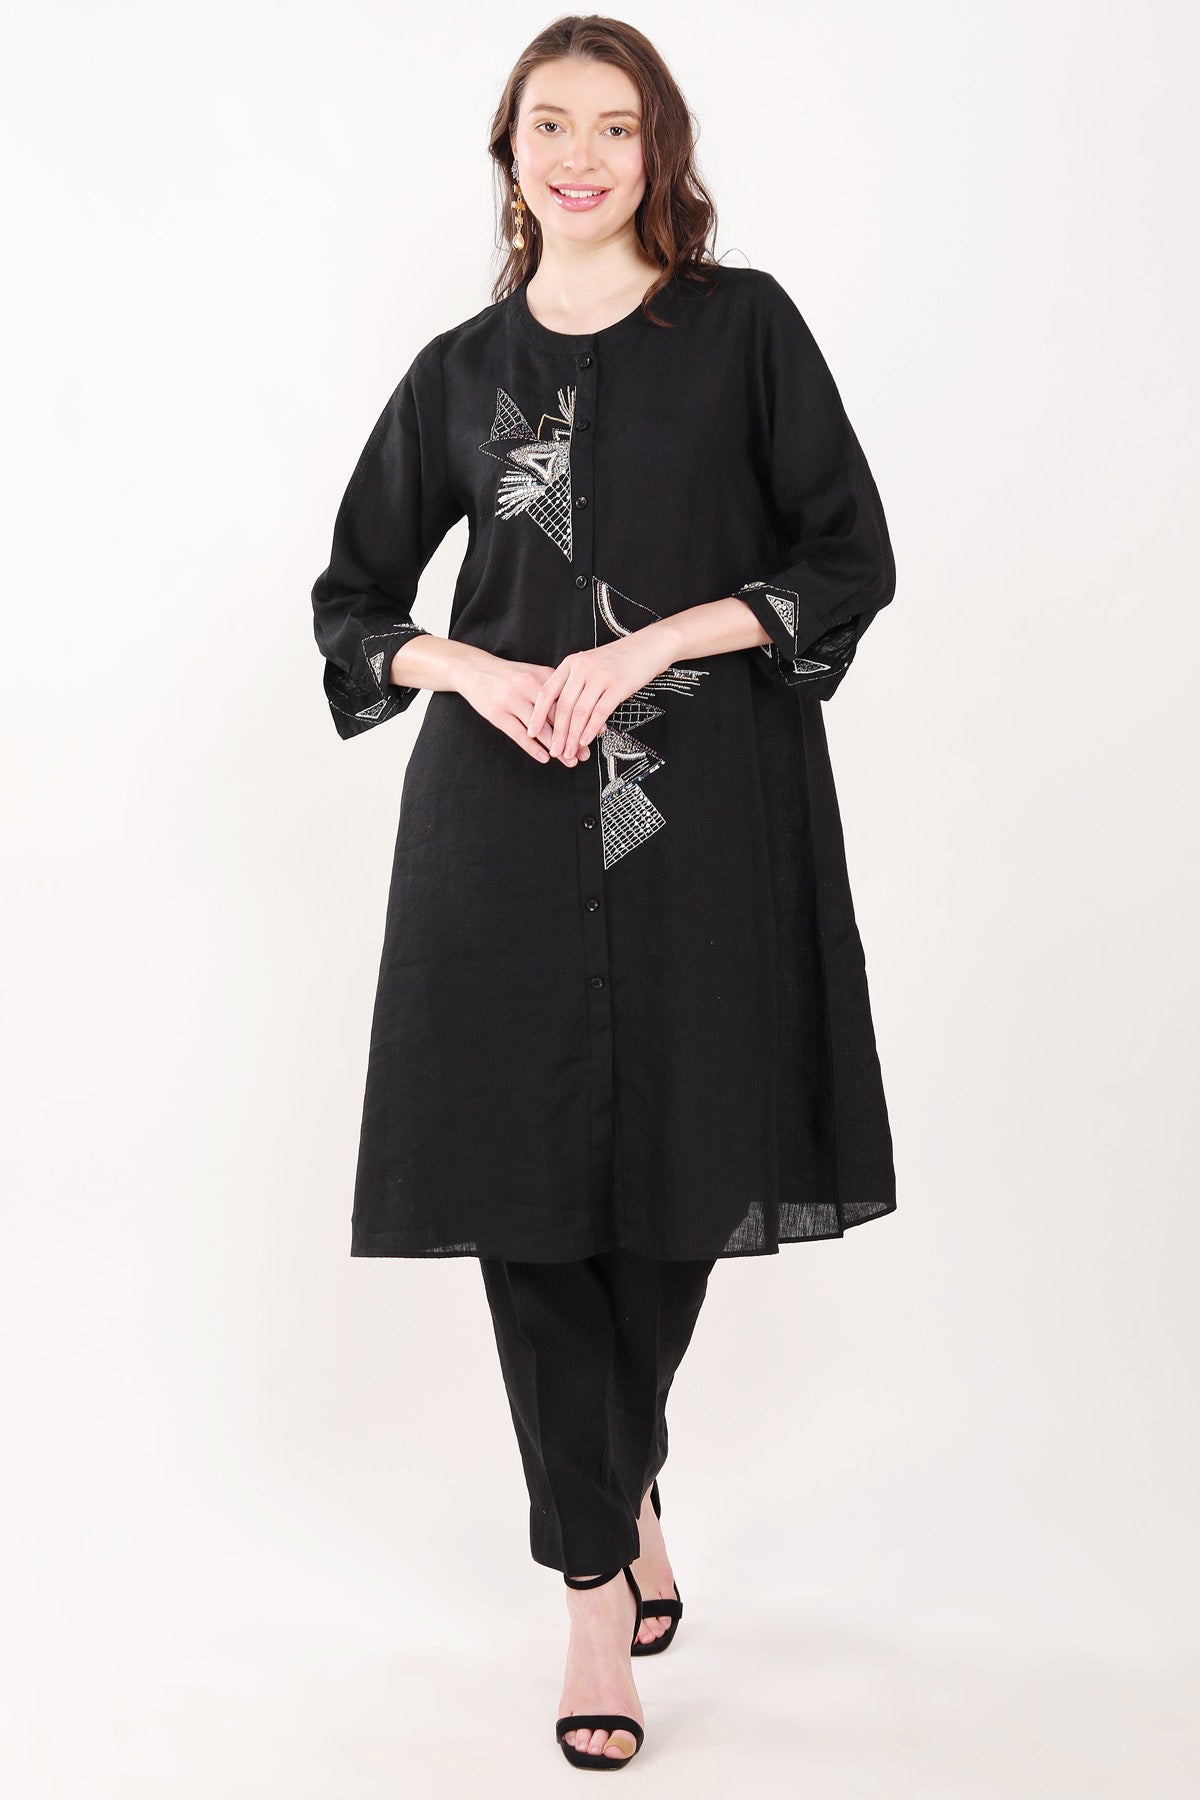 Linen Bloom Black Sequins Embroidered Tunic for women online at ScrollnShops